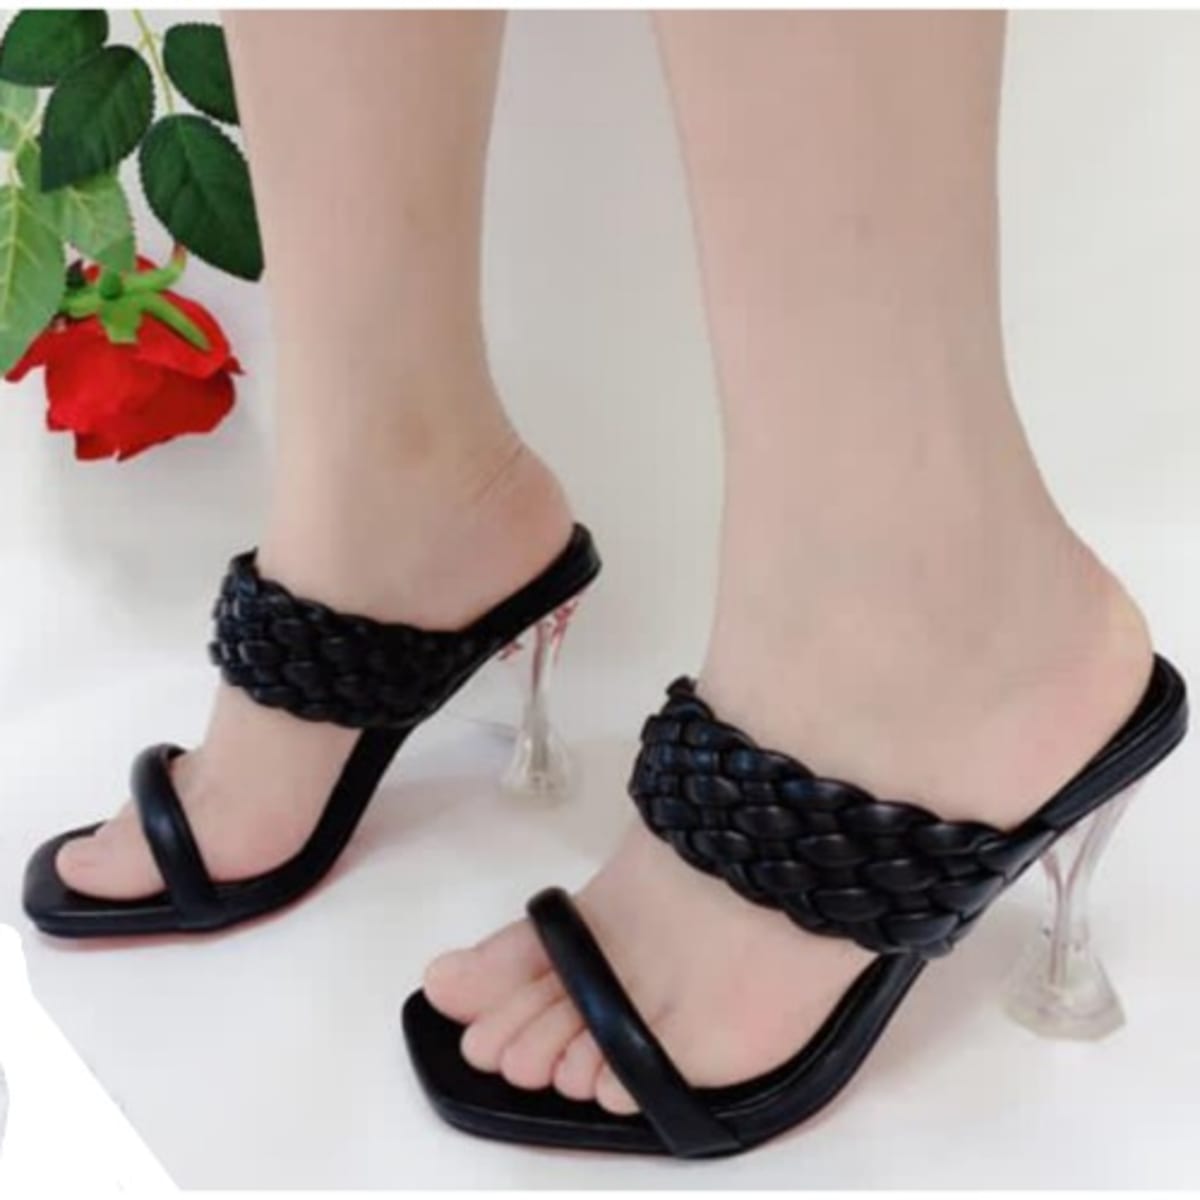 Black Party Shoes Heels for Kids party and dressing up